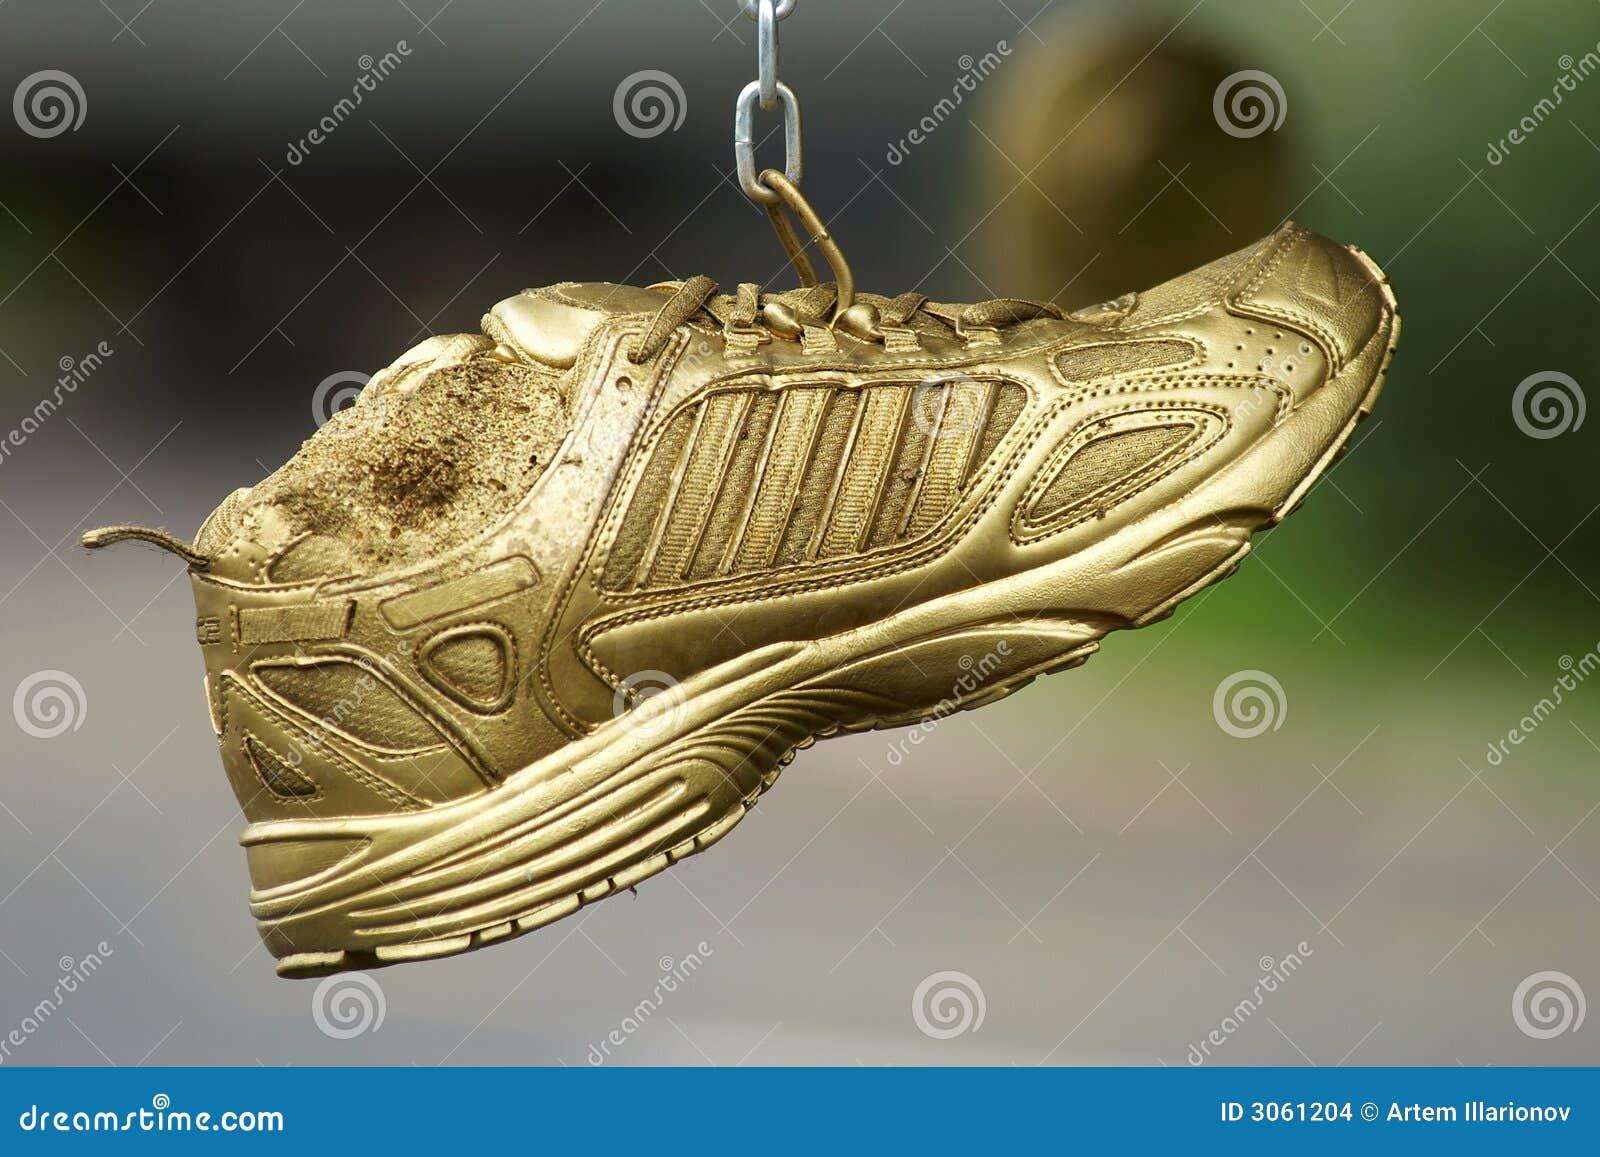 Buy gold running shoes cheap online